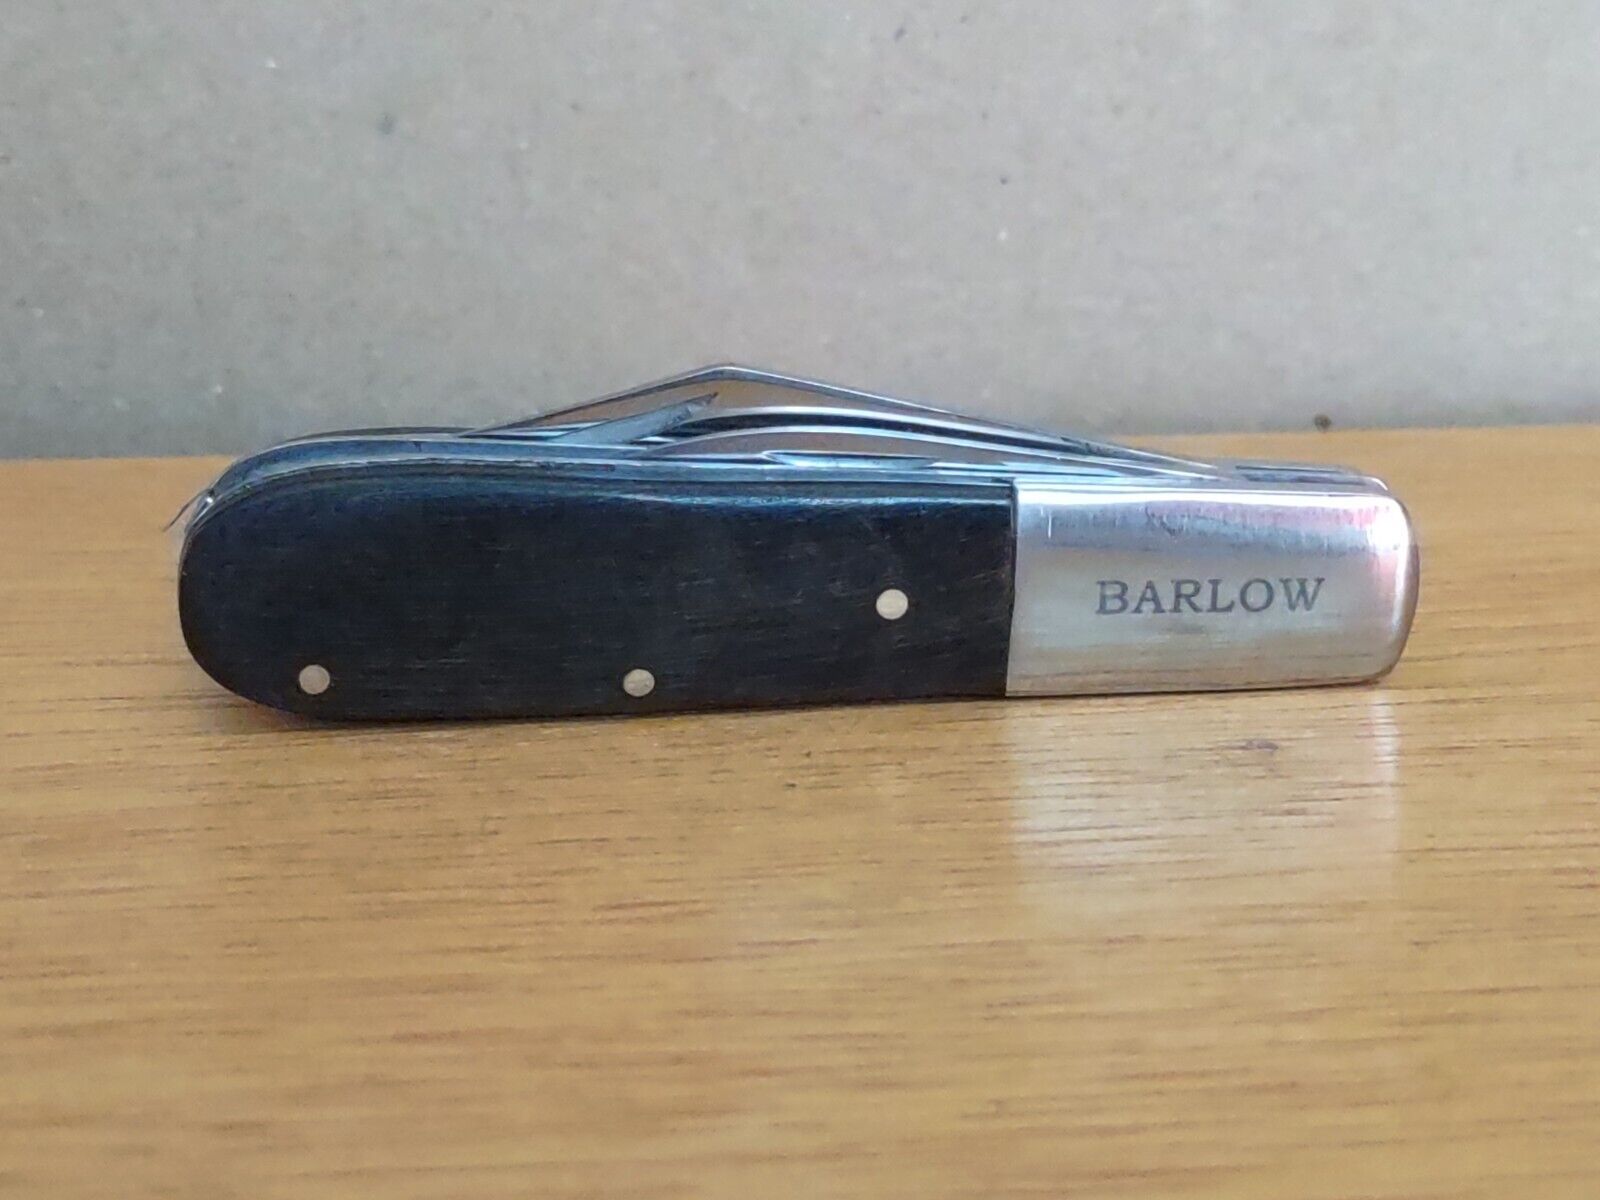 Vintage Barlow Two Blade Pocket Knife in VERY Good Condition, Celluloid Handle